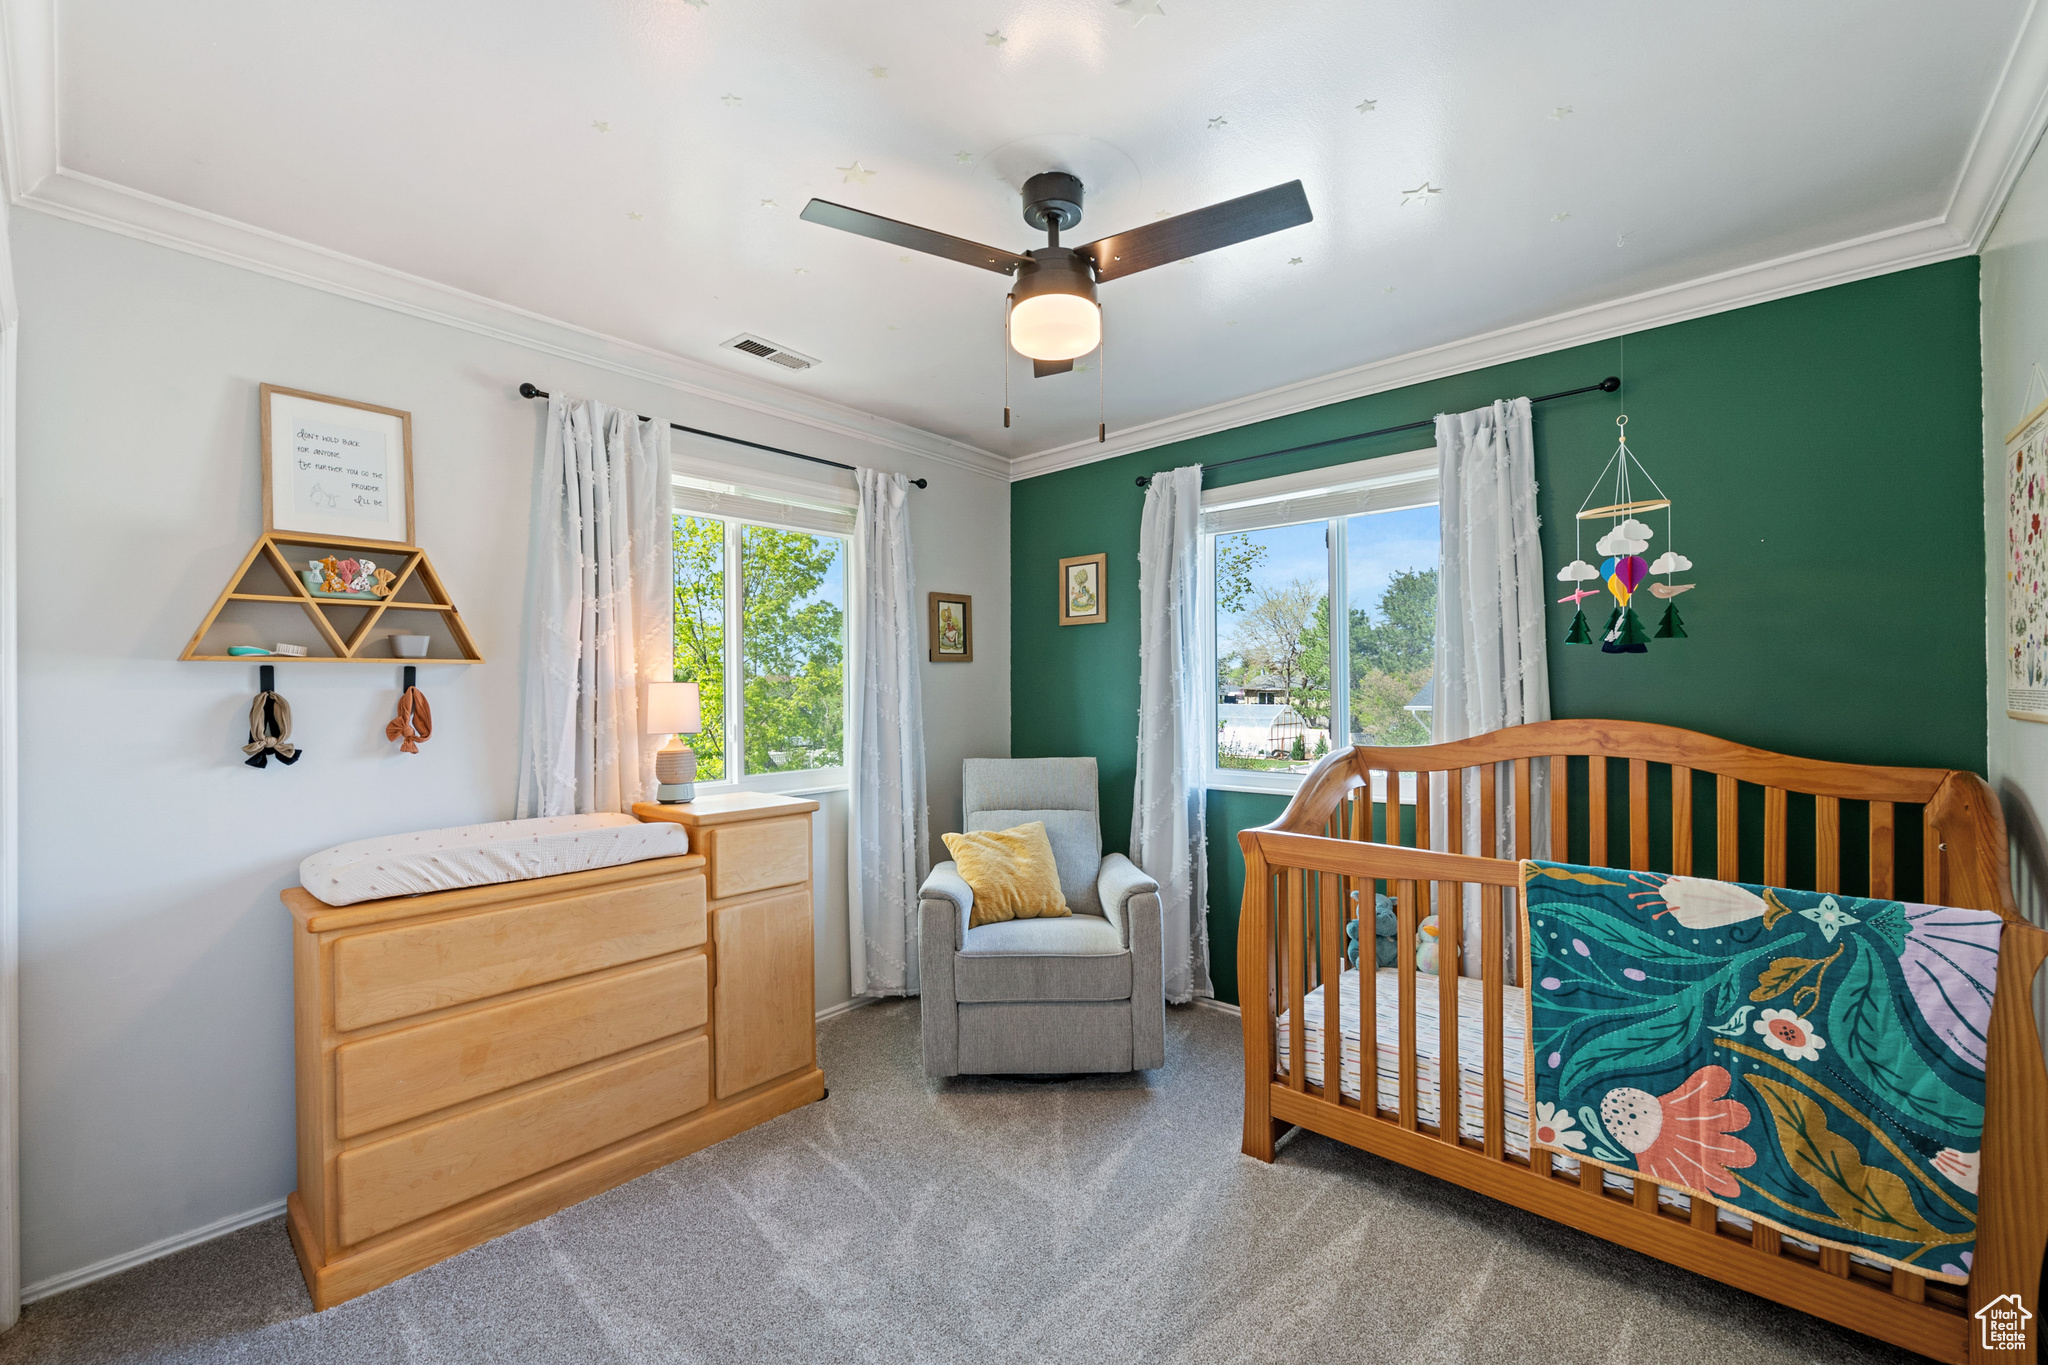 Bedroom featuring crown molding, ceiling fan, a crib, and carpet floors